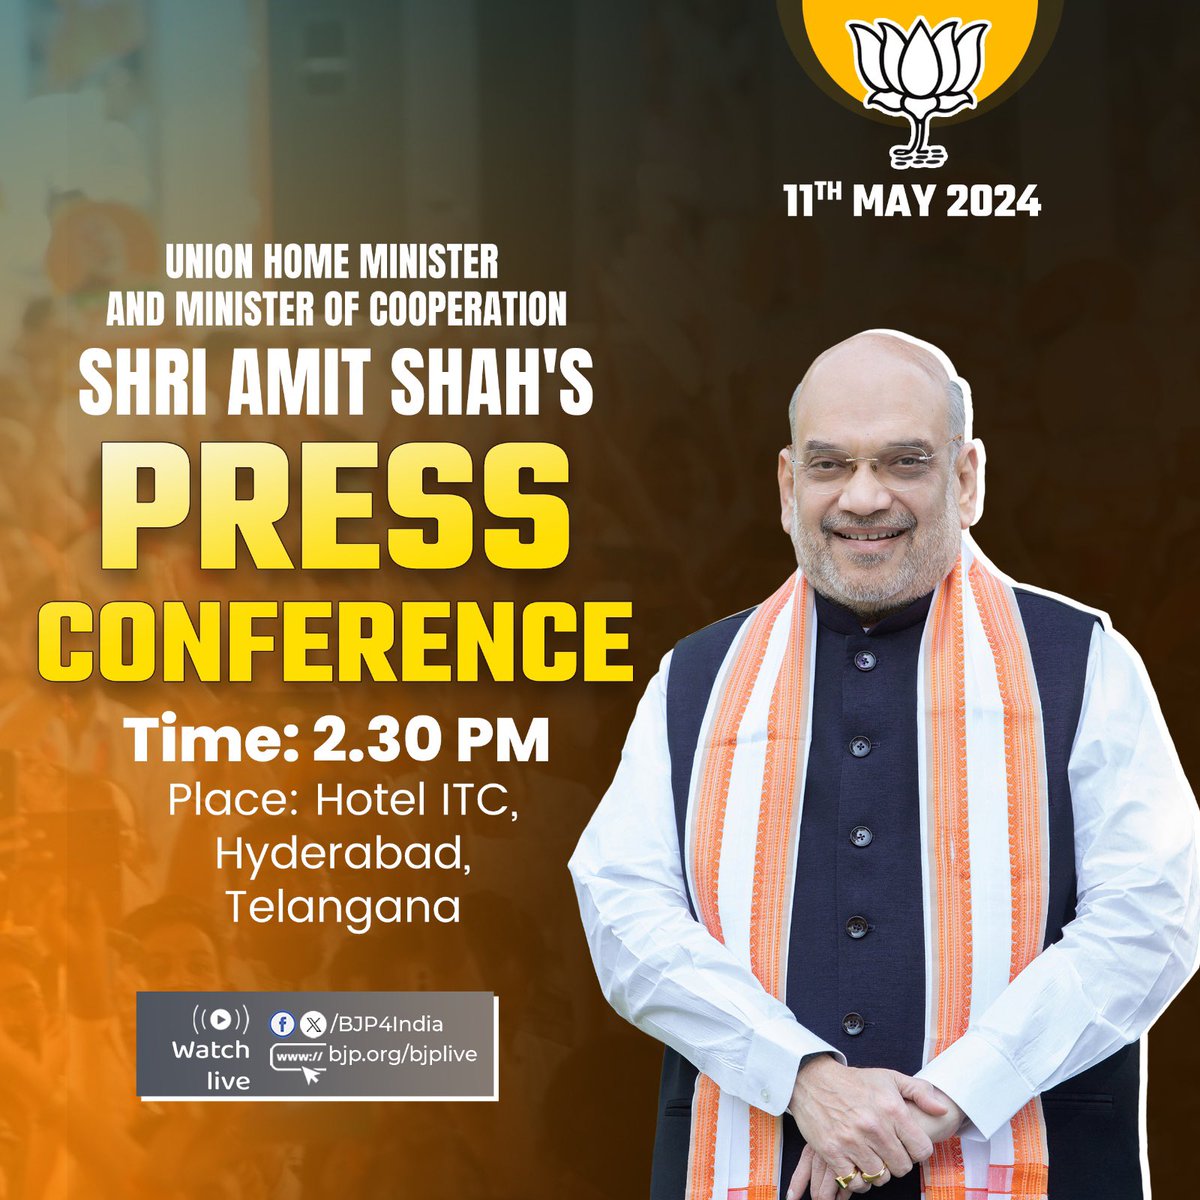 Union Home Minister and Minister of Cooperation Shri @AmitShah will hold a press conference in Hyderabad, Telangana on 11th May 2024. Watch live: 📺x.com/bjp4india 📺facebook.com/BJP4India 📺youtube.com/BJP4India 📺bjp.org/bjplive